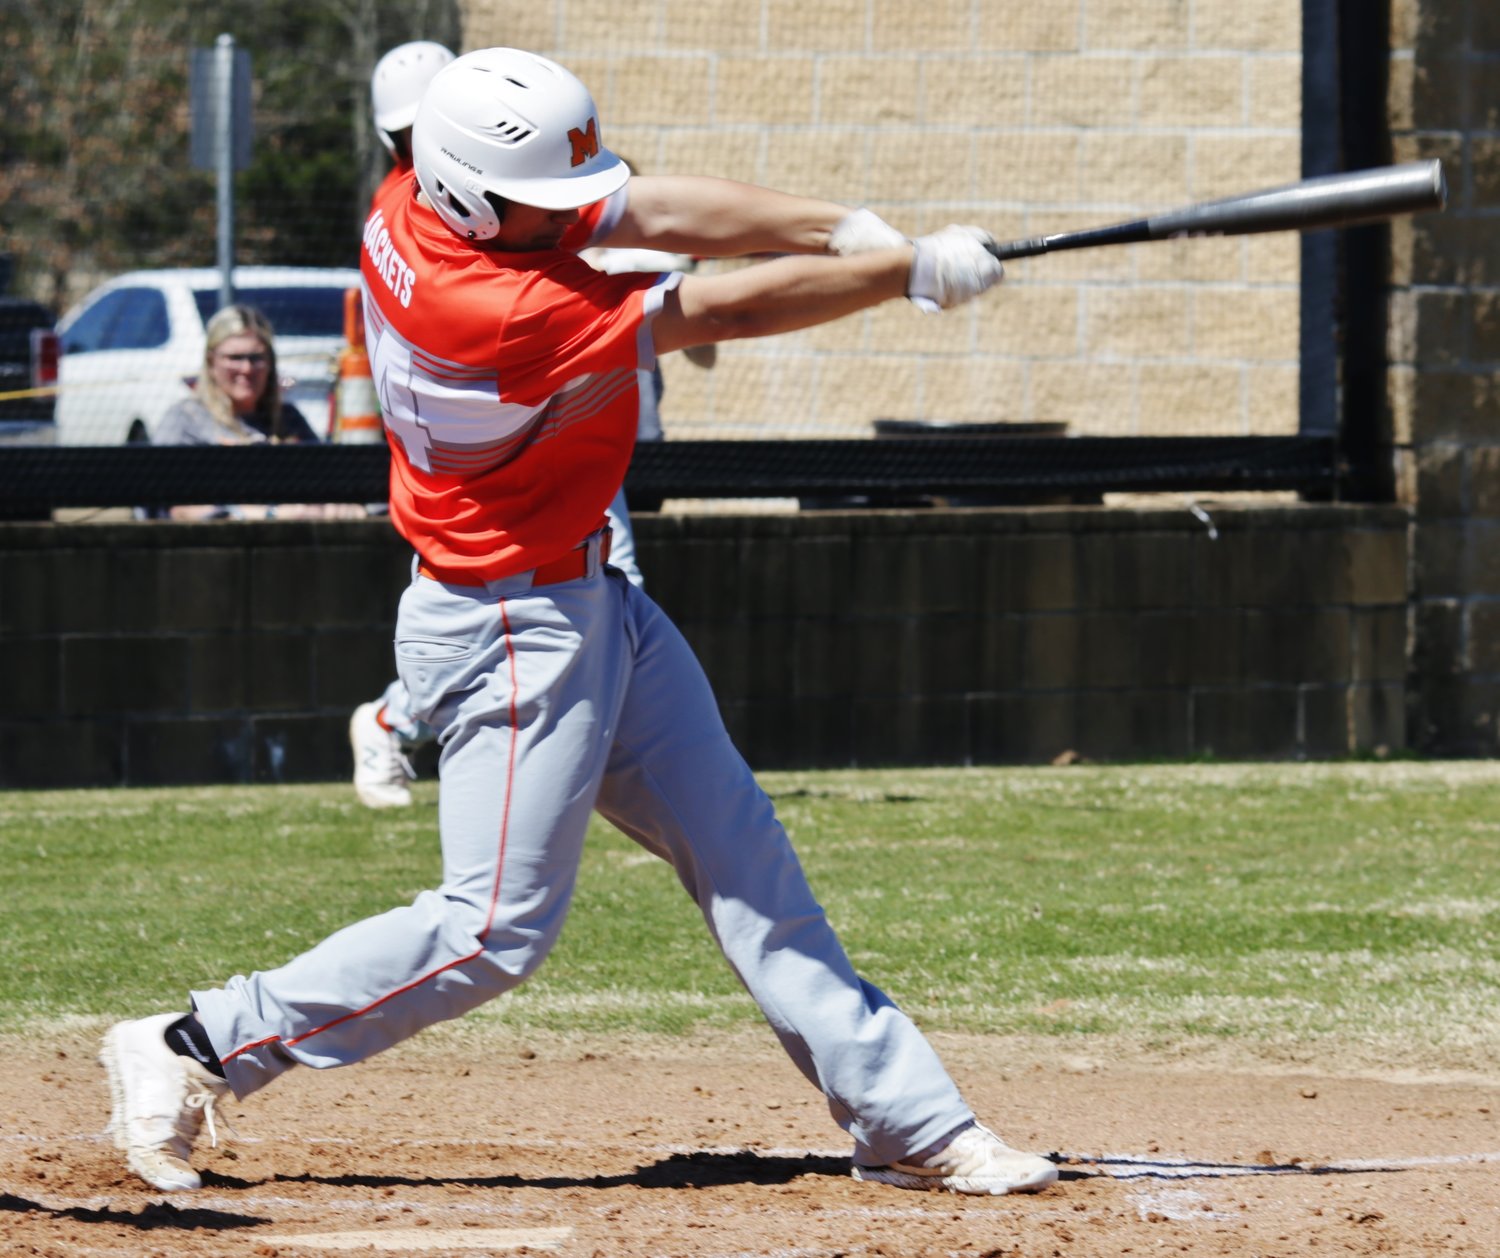 Mineola’s Trevor Singletary demonstrates perfect form as he lined a base hit to center to lead-off the second inning against Harmony. Singletary would come around to score as Mineola recorded an 8-3 win.